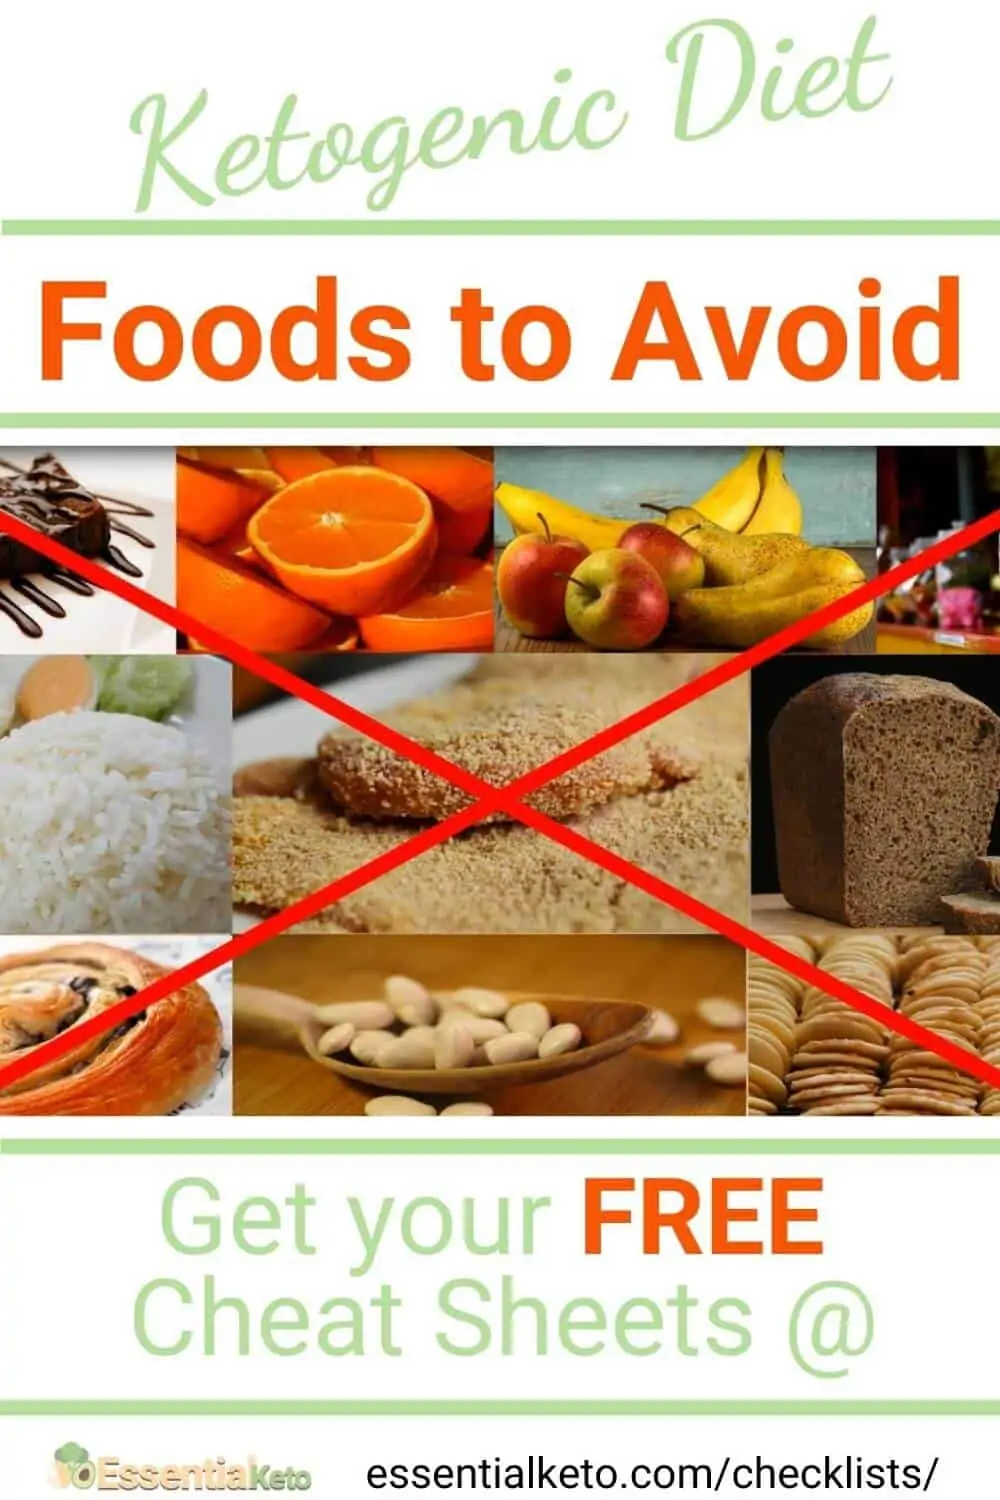 Food to avoid crossed out